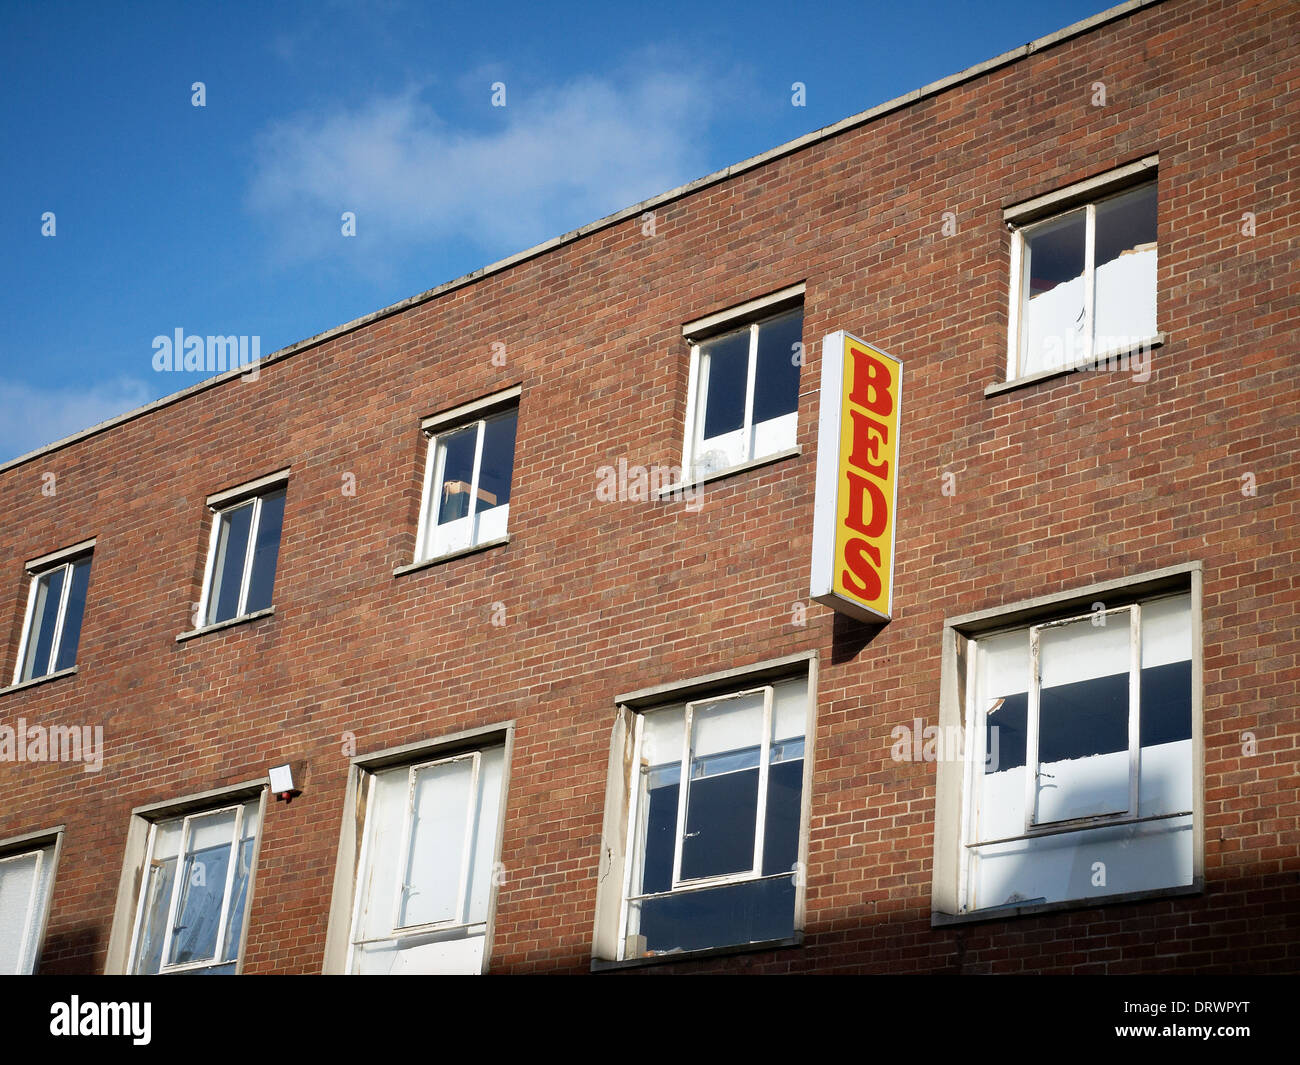 Beds sign on external wall in Crewe Cheshire UK Stock Photo